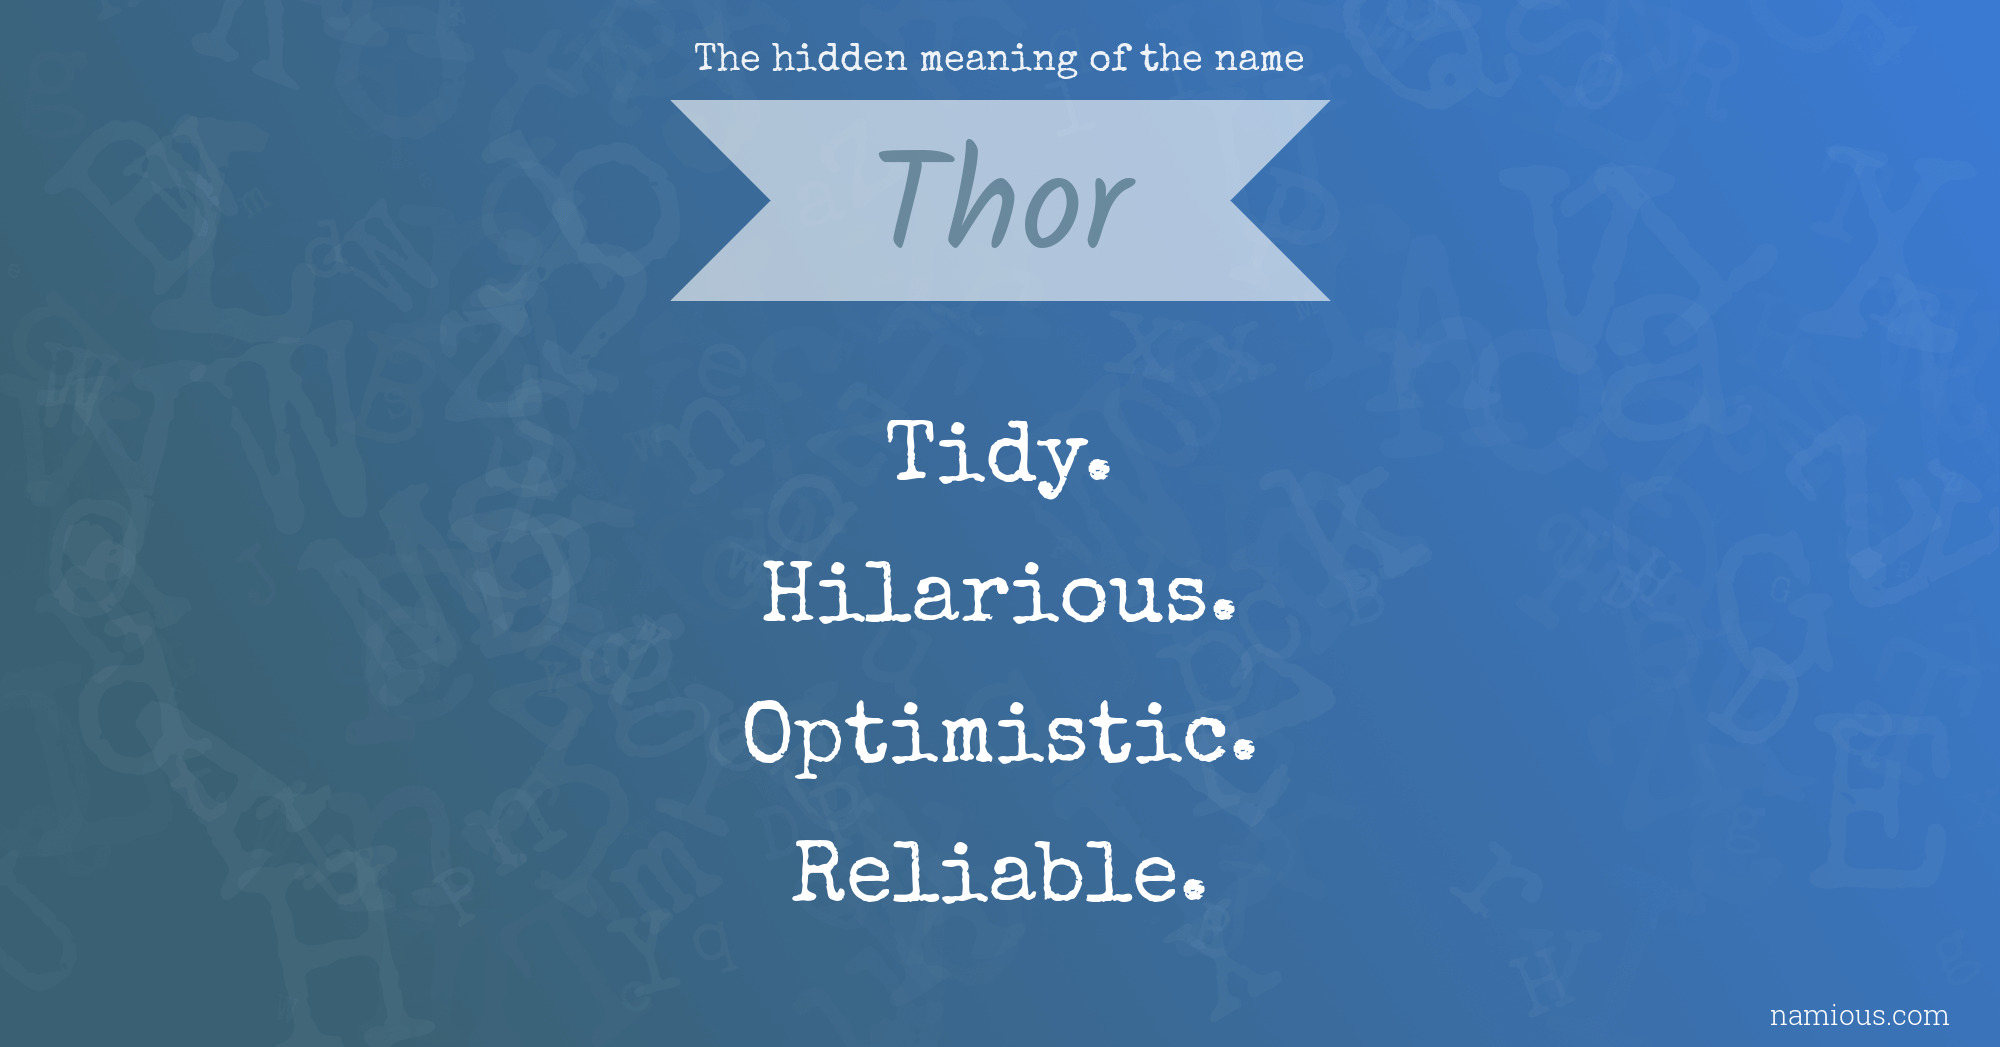 The hidden meaning of the name Thor